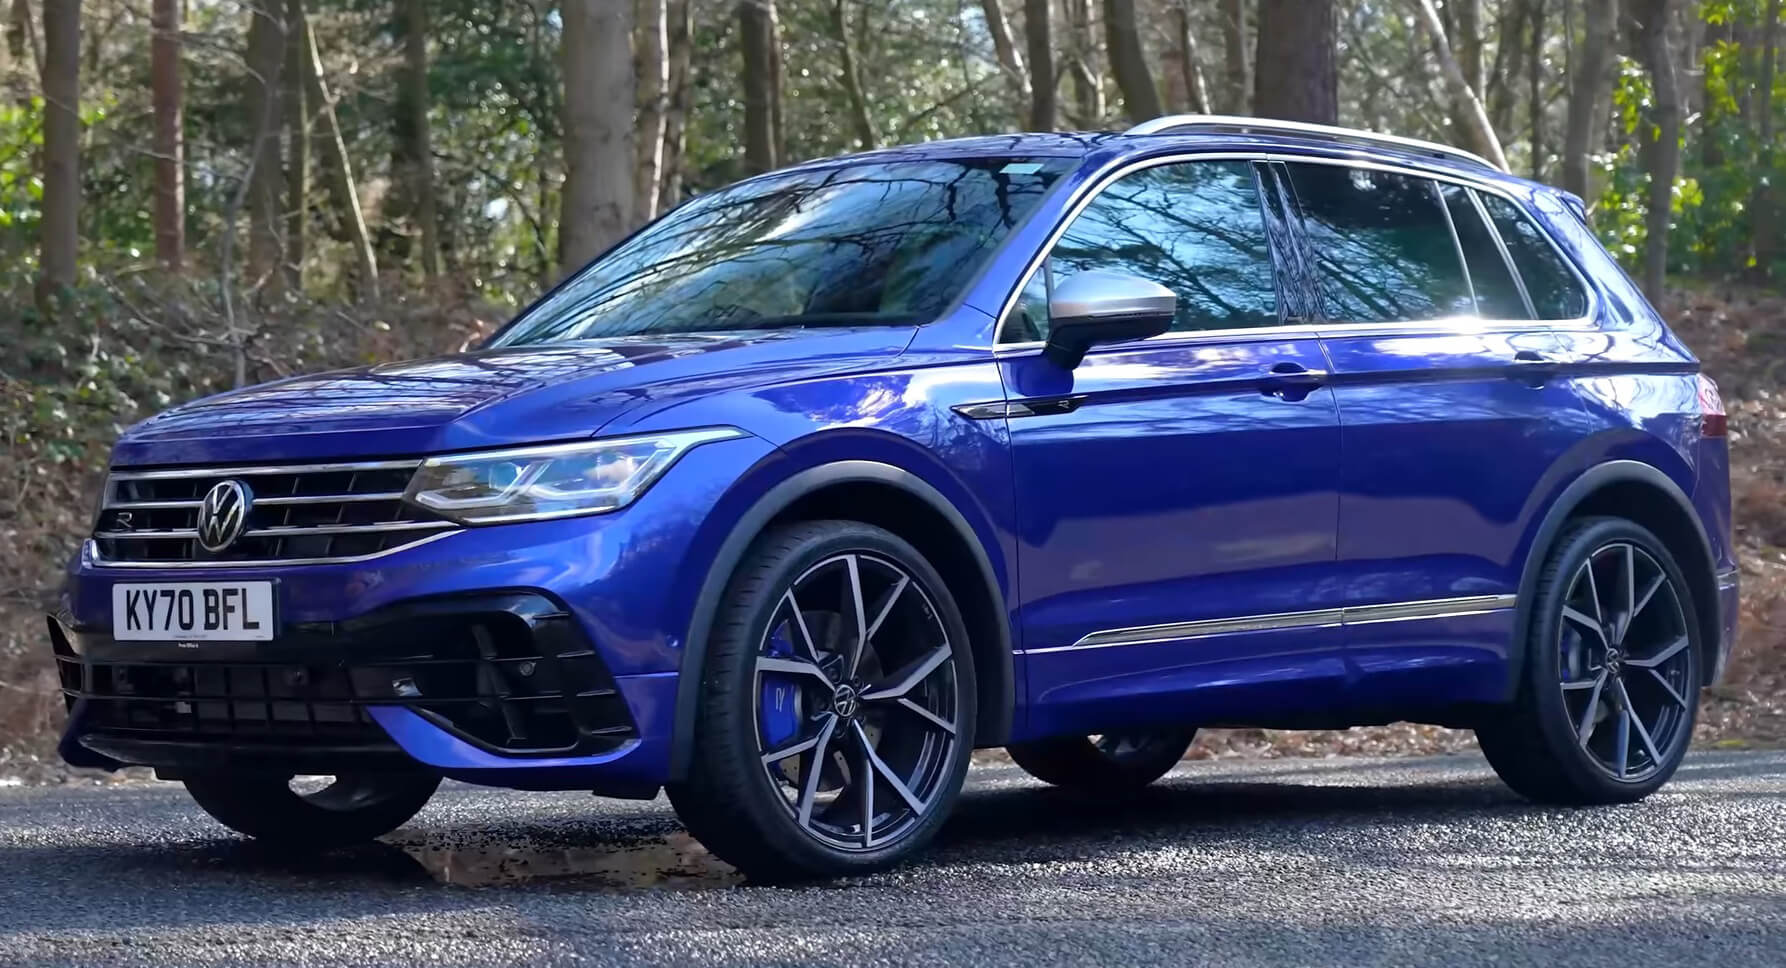 The Volkswagen Tiguan R Is Practical And Fast, But Is It Fun To